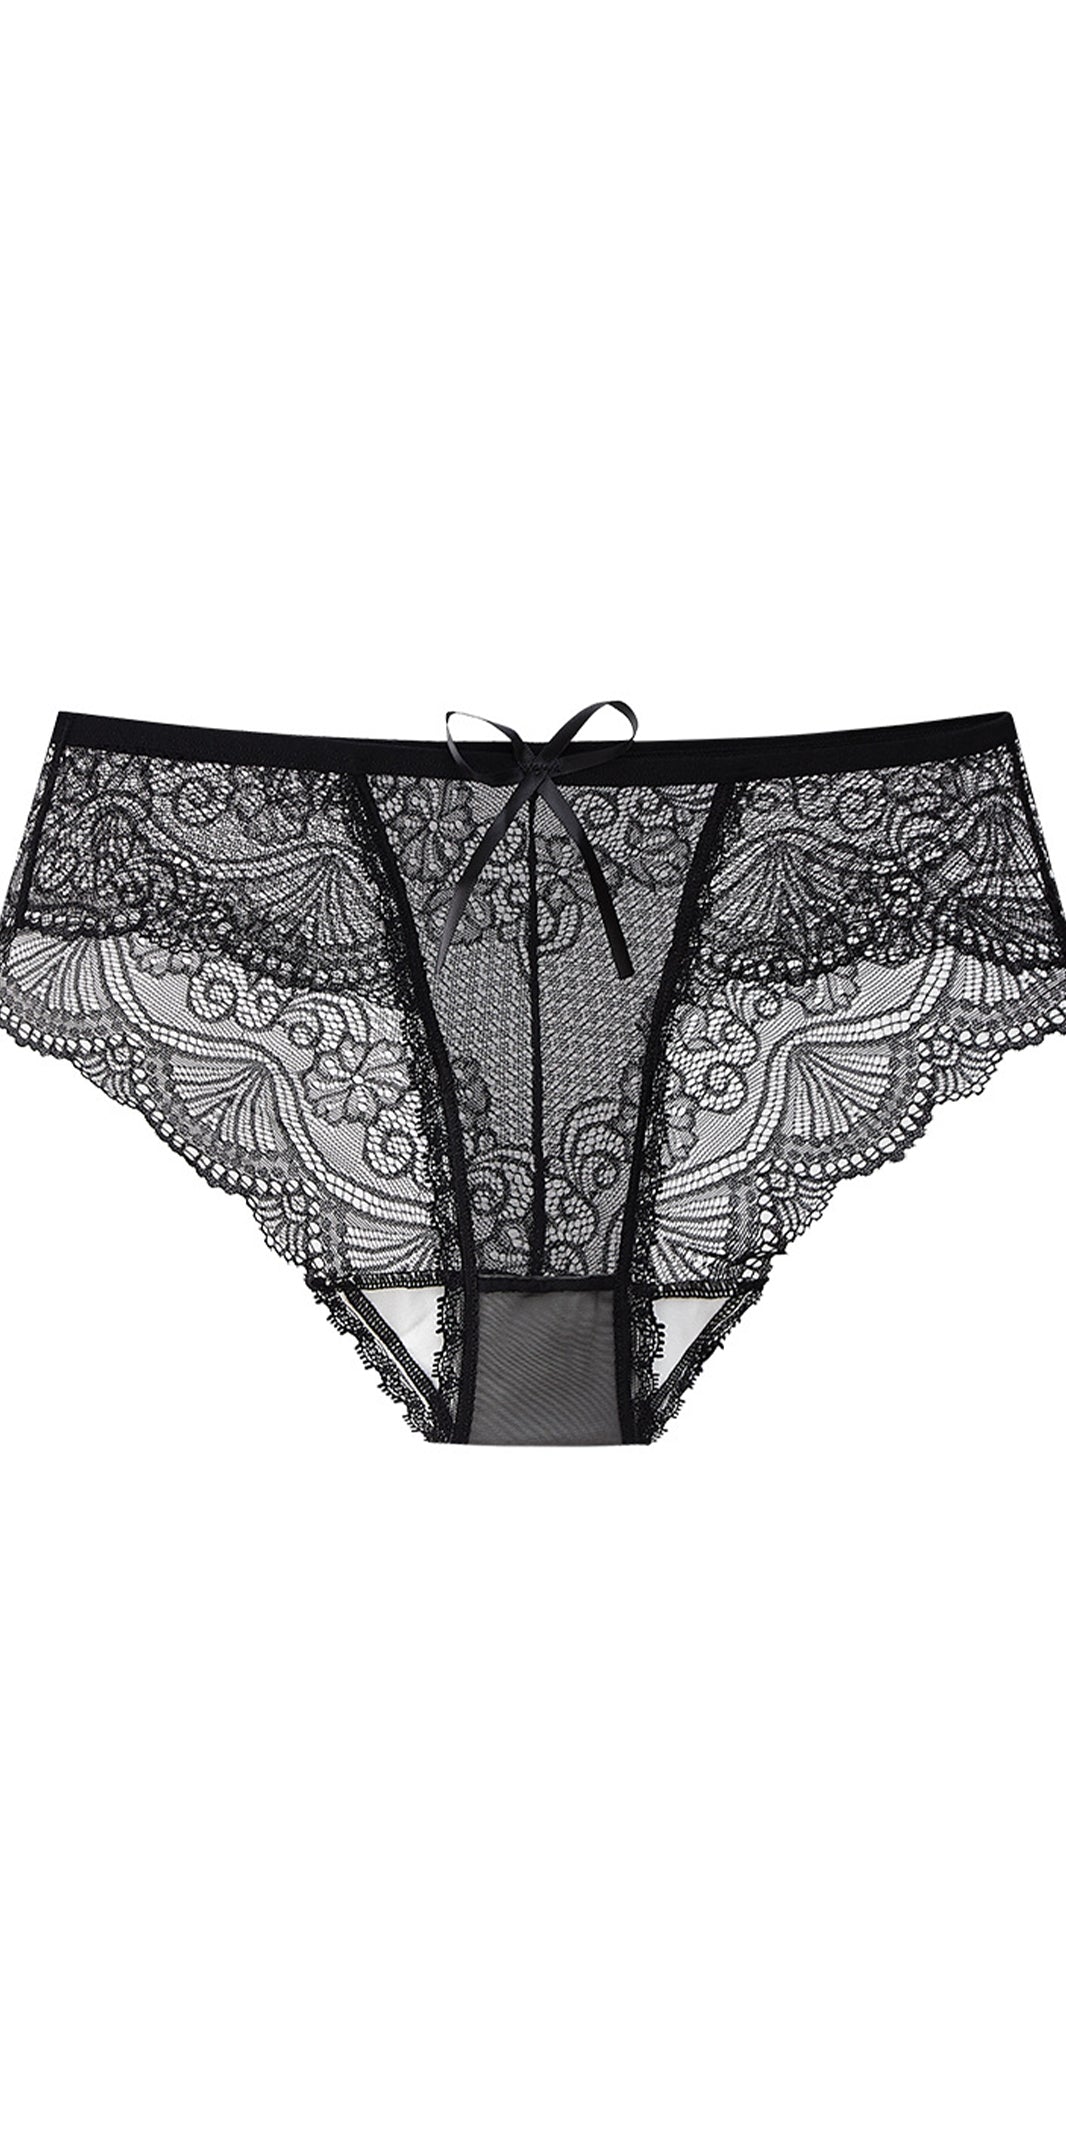 Sexy Lace Mid-rise Mesh Panties